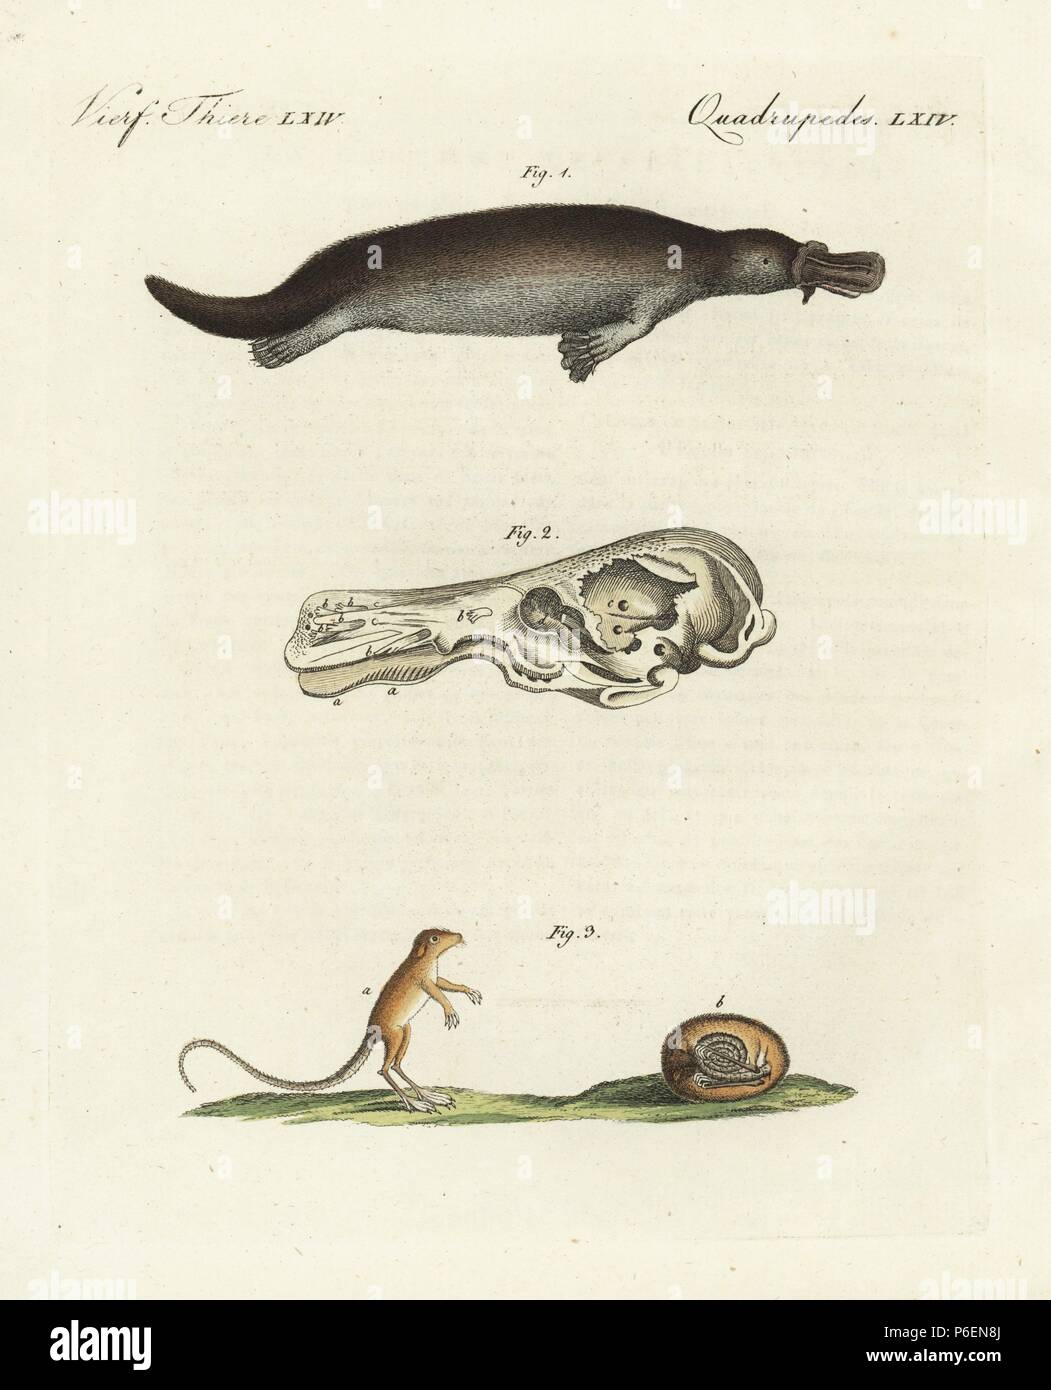 Duck-billed platypus 1, Ornithorhynchus anatinus, skull 2, and meadow jumping mouse, Zapus hudonius, awake 1 and hibernating 2. Handcoloured copperplate engraving from Bertuch's 'Bilderbuch fur Kinder' (Picture Book for Children), Weimar, 1798. Friedrich Johann Bertuch (1747-1822) was a German publisher and man of arts most famous for his 12-volume encyclopedia for children illustrated with 1,200 engraved plates on natural history, science, costume, mythology, etc., published from 1790-1830. Stock Photo